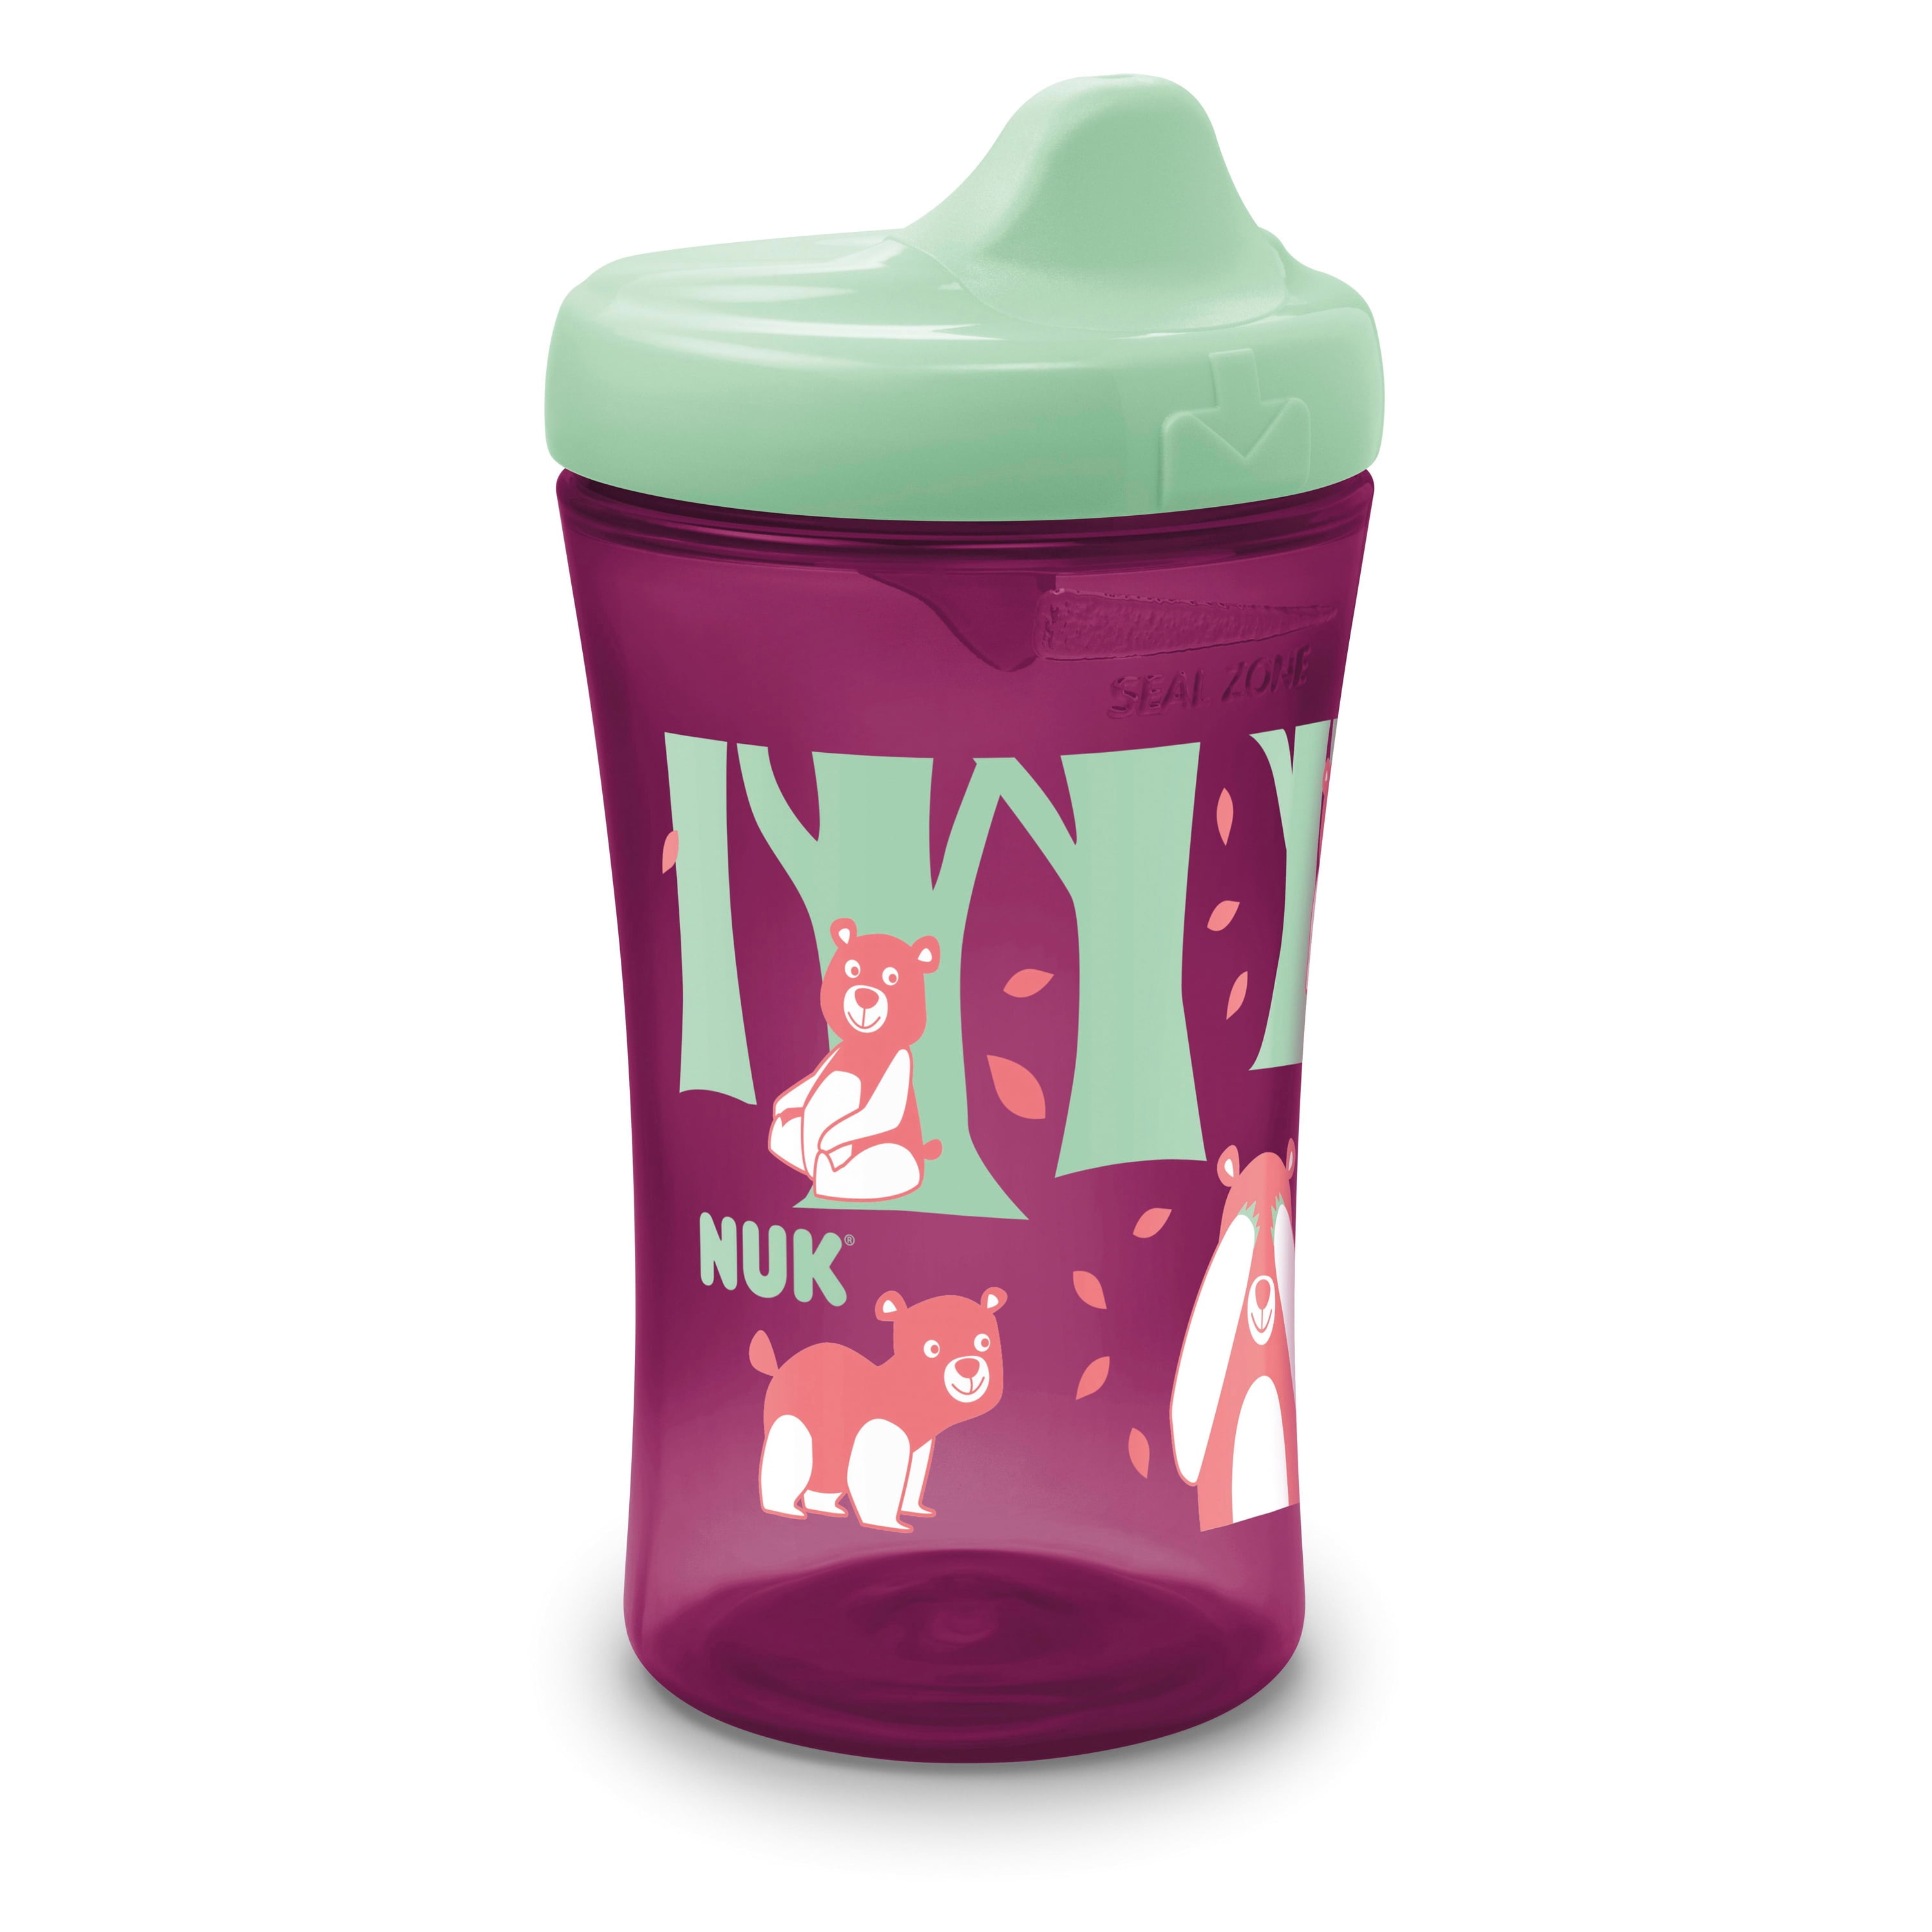 Nuk First Essentials Hard Spout Sippy Cup in Assorted Colors-10 Ounce (Pack  of 1 )